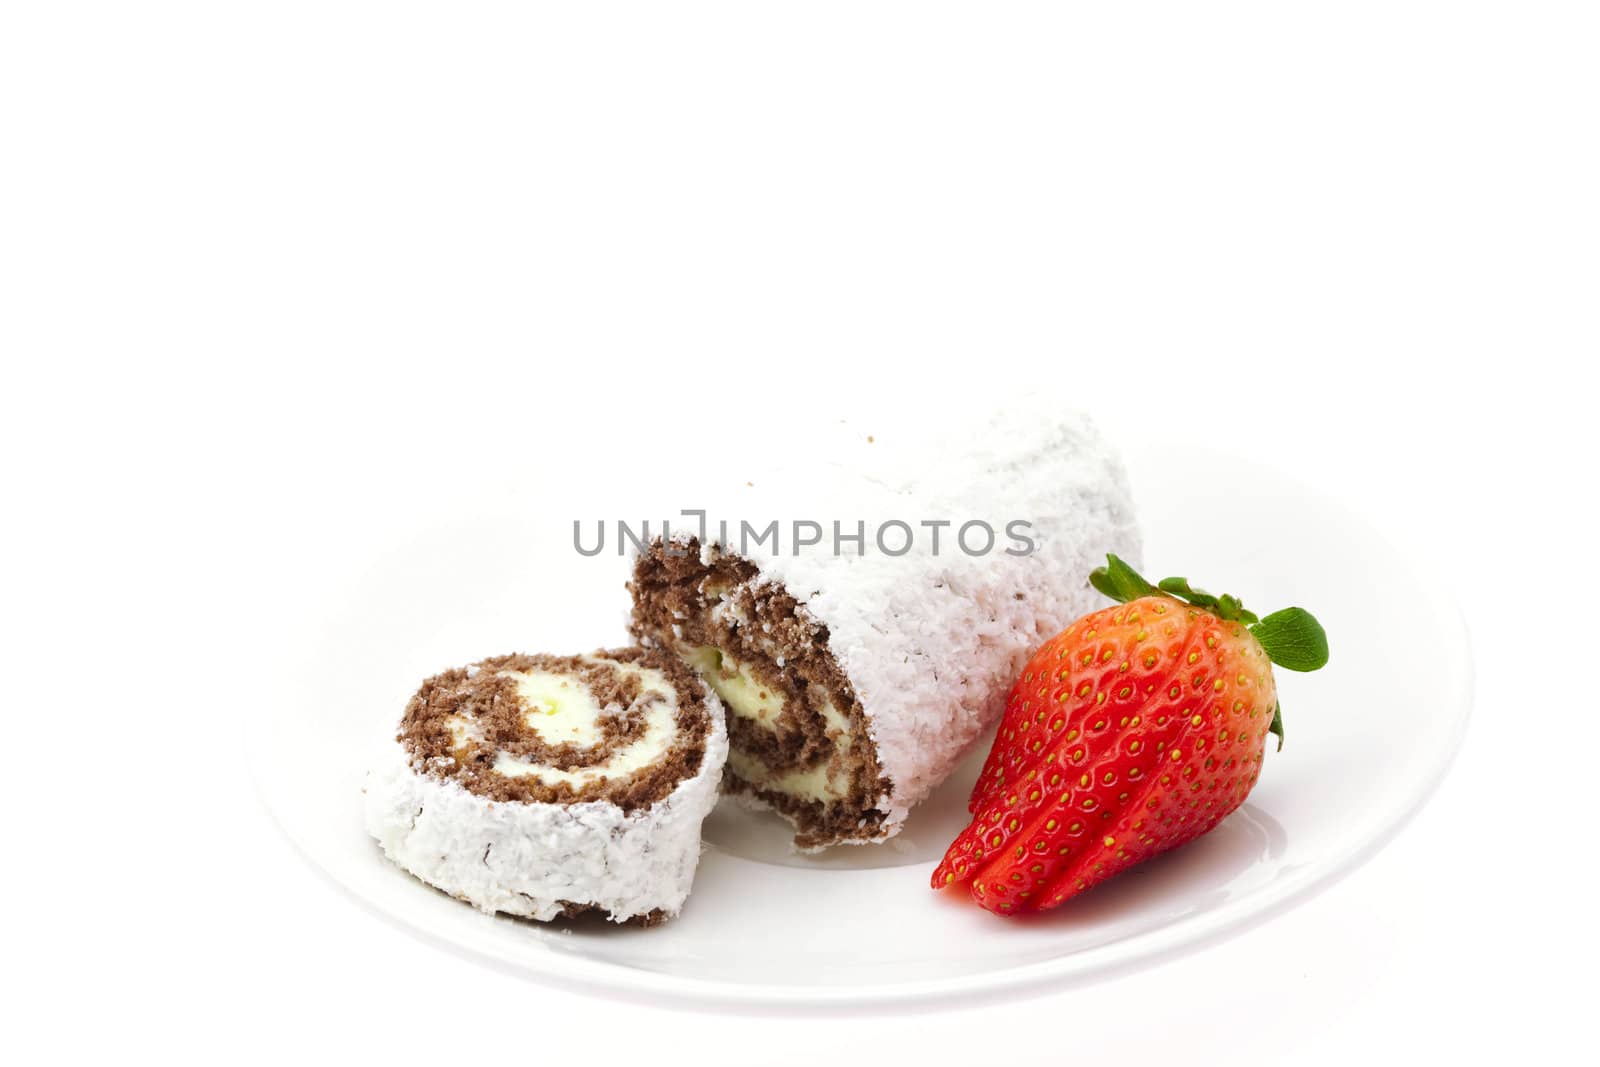 strawberries and roll on a plate isolated on white